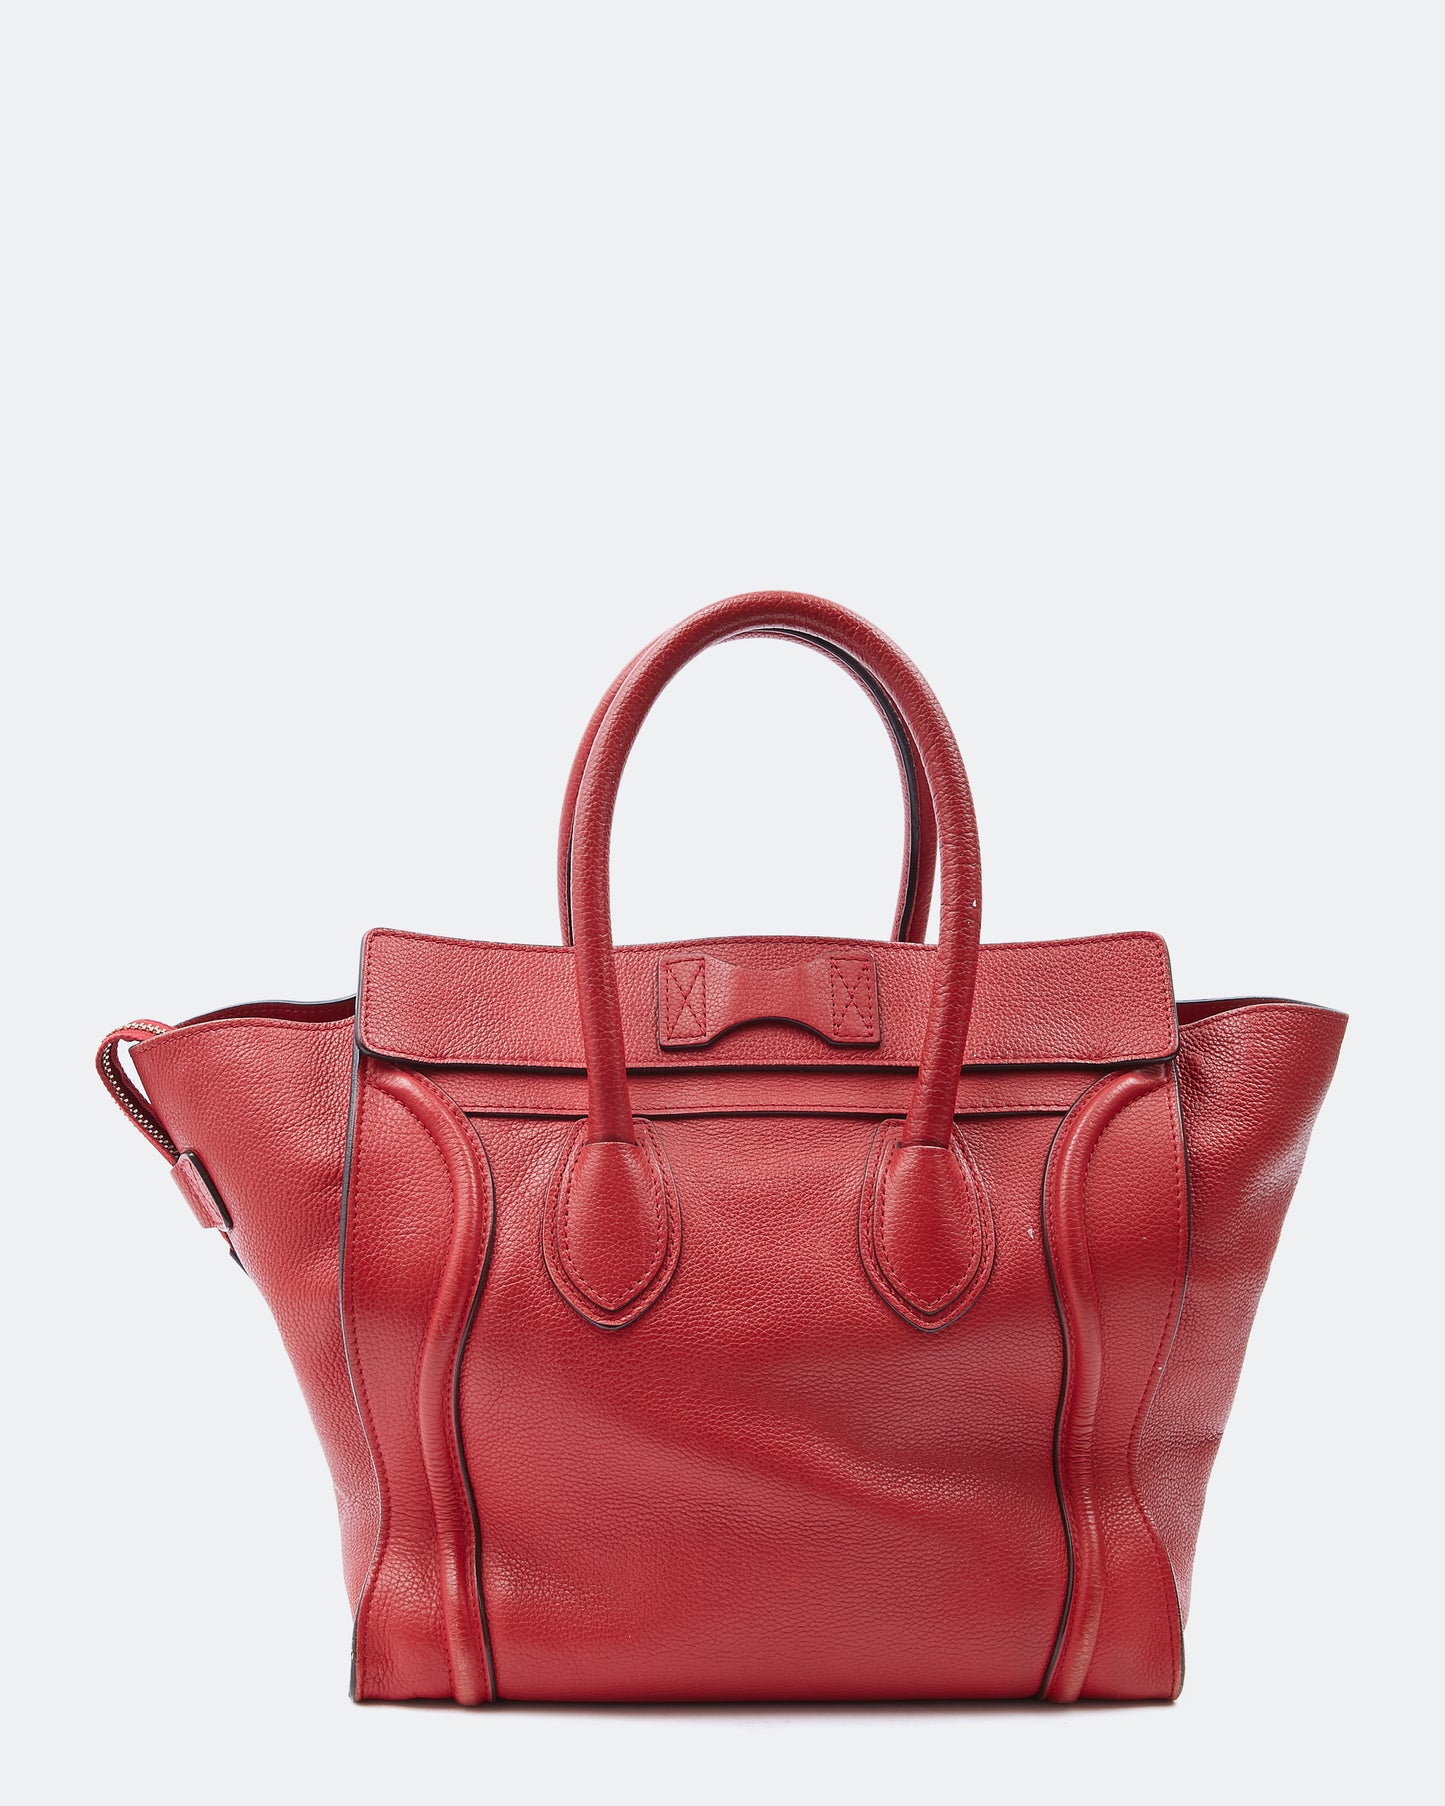 Celine Red Leather Micro Luggage Tote Bag